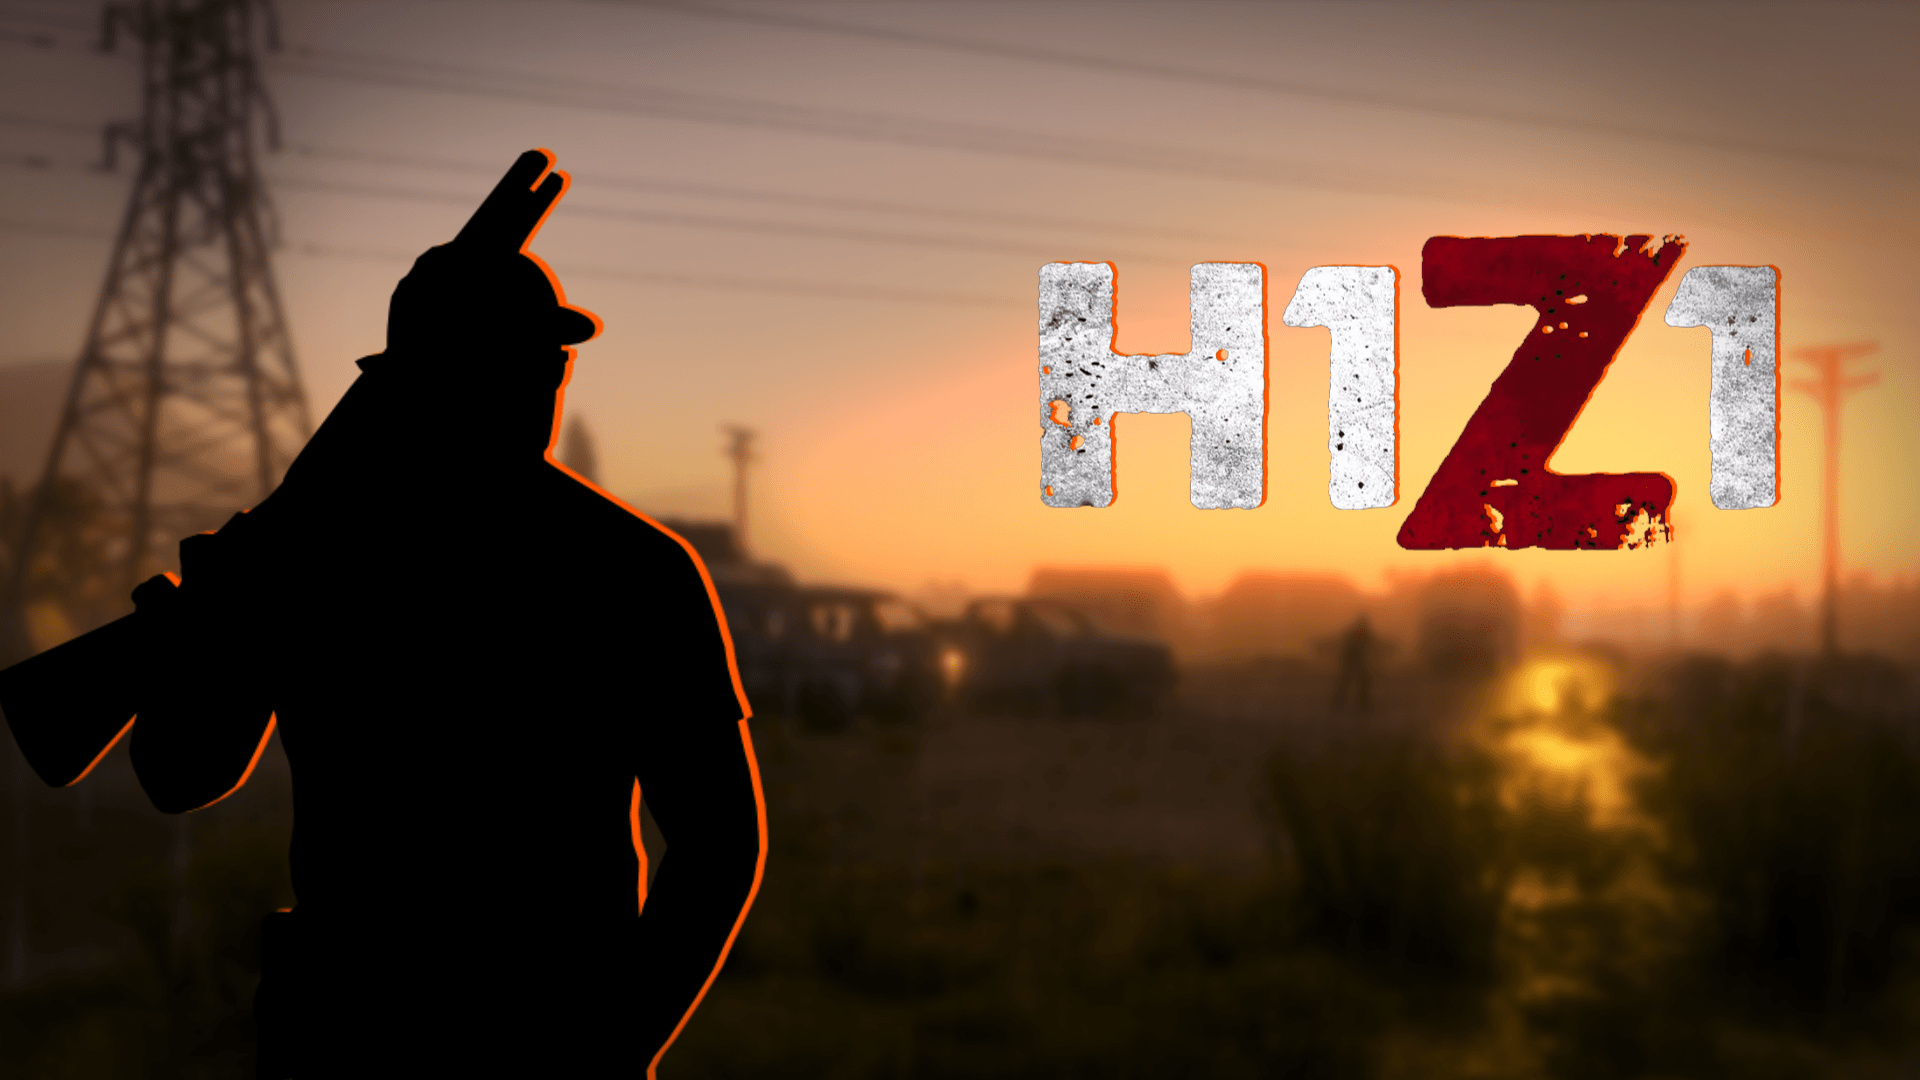 H1Z1 Wallpapers - Top Free H1Z1 Backgrounds 1920x1080